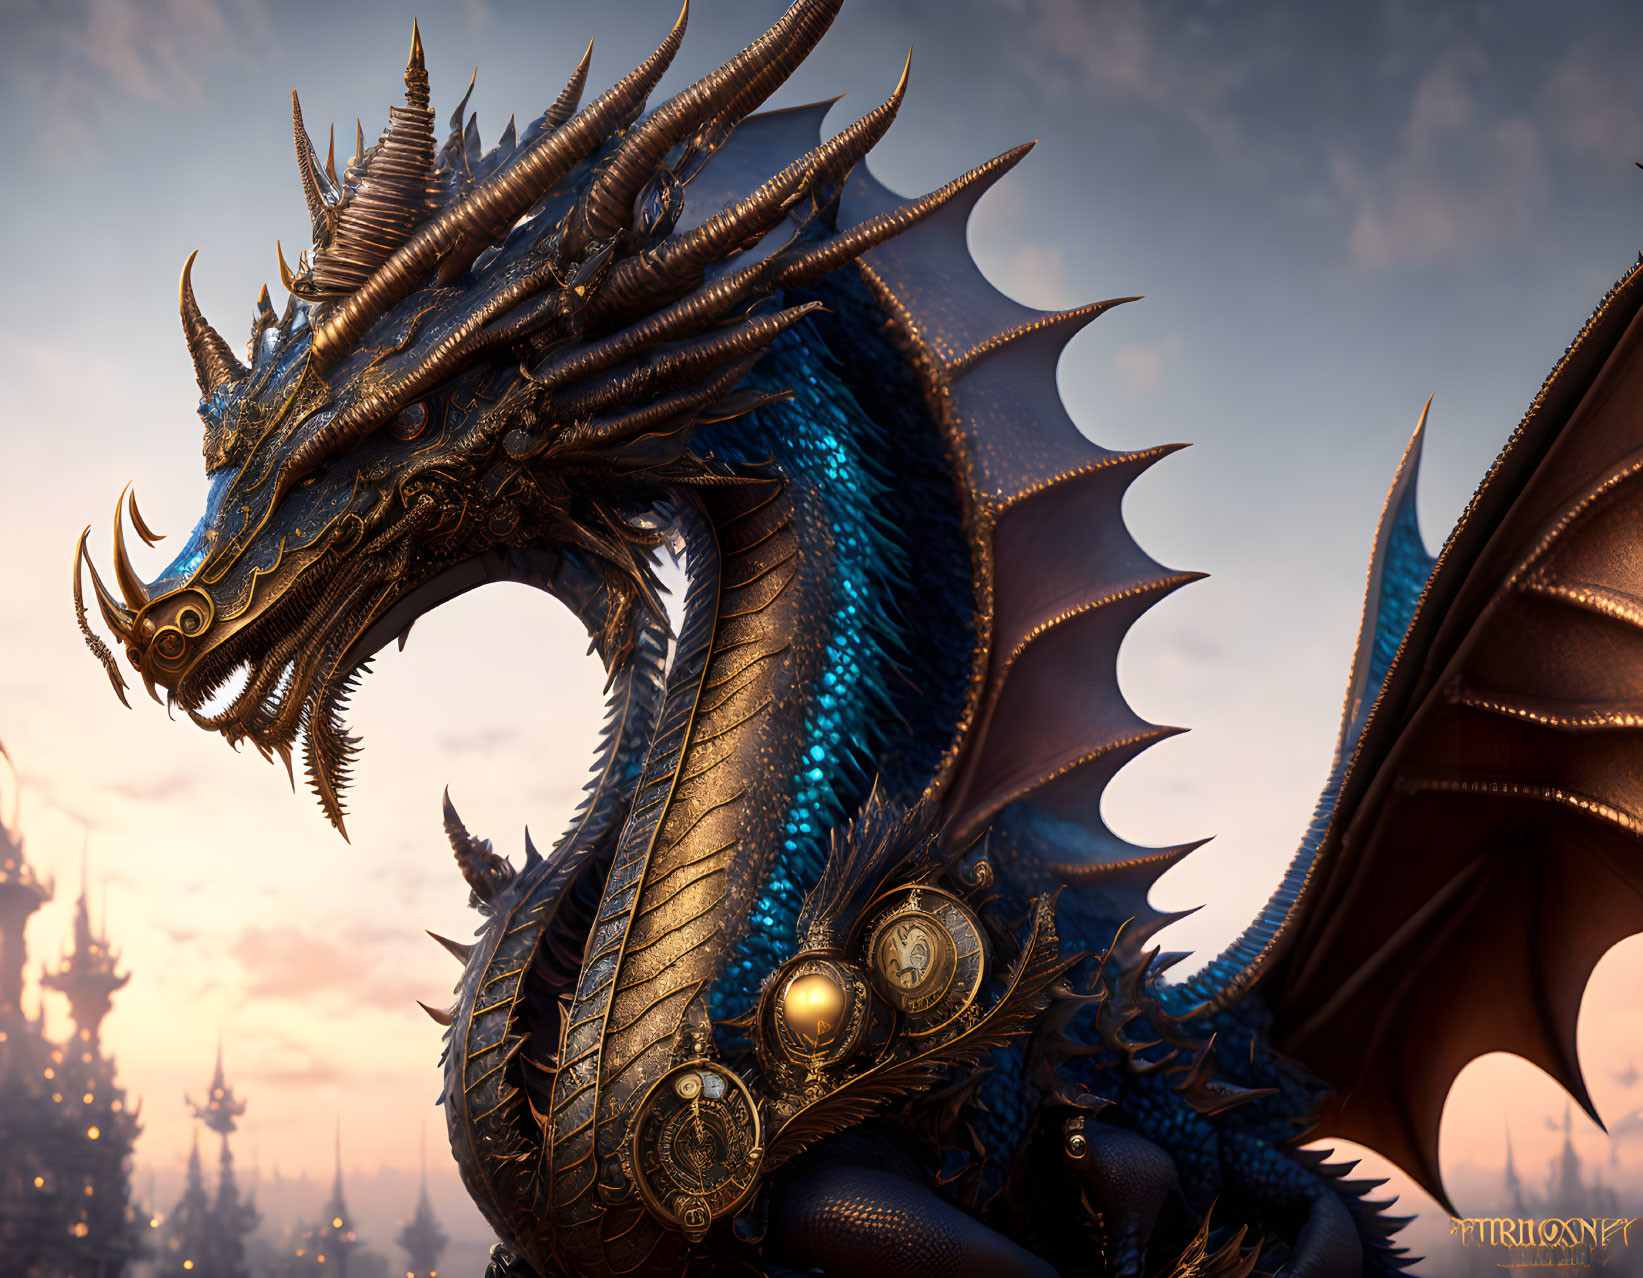 Blue-Scaled Dragon with Golden Accents in Fantasy Dusk Skyline